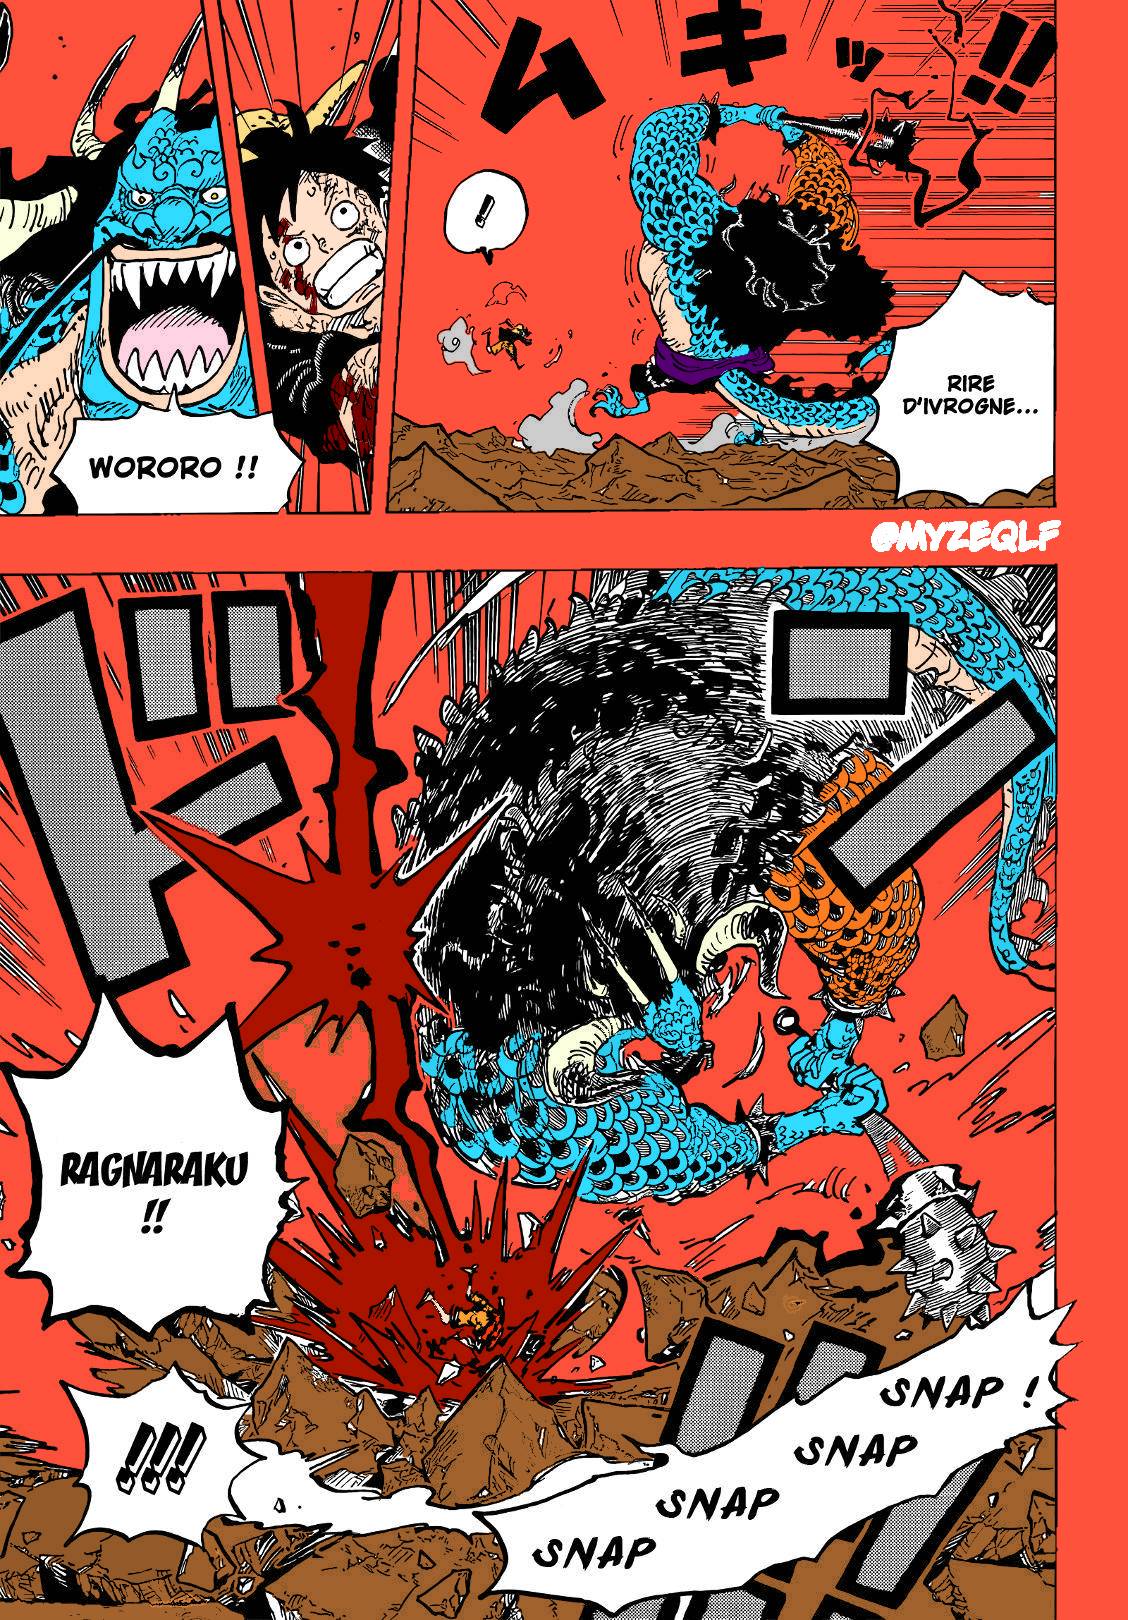 One Piece 1037: What To Expect From The Chapter